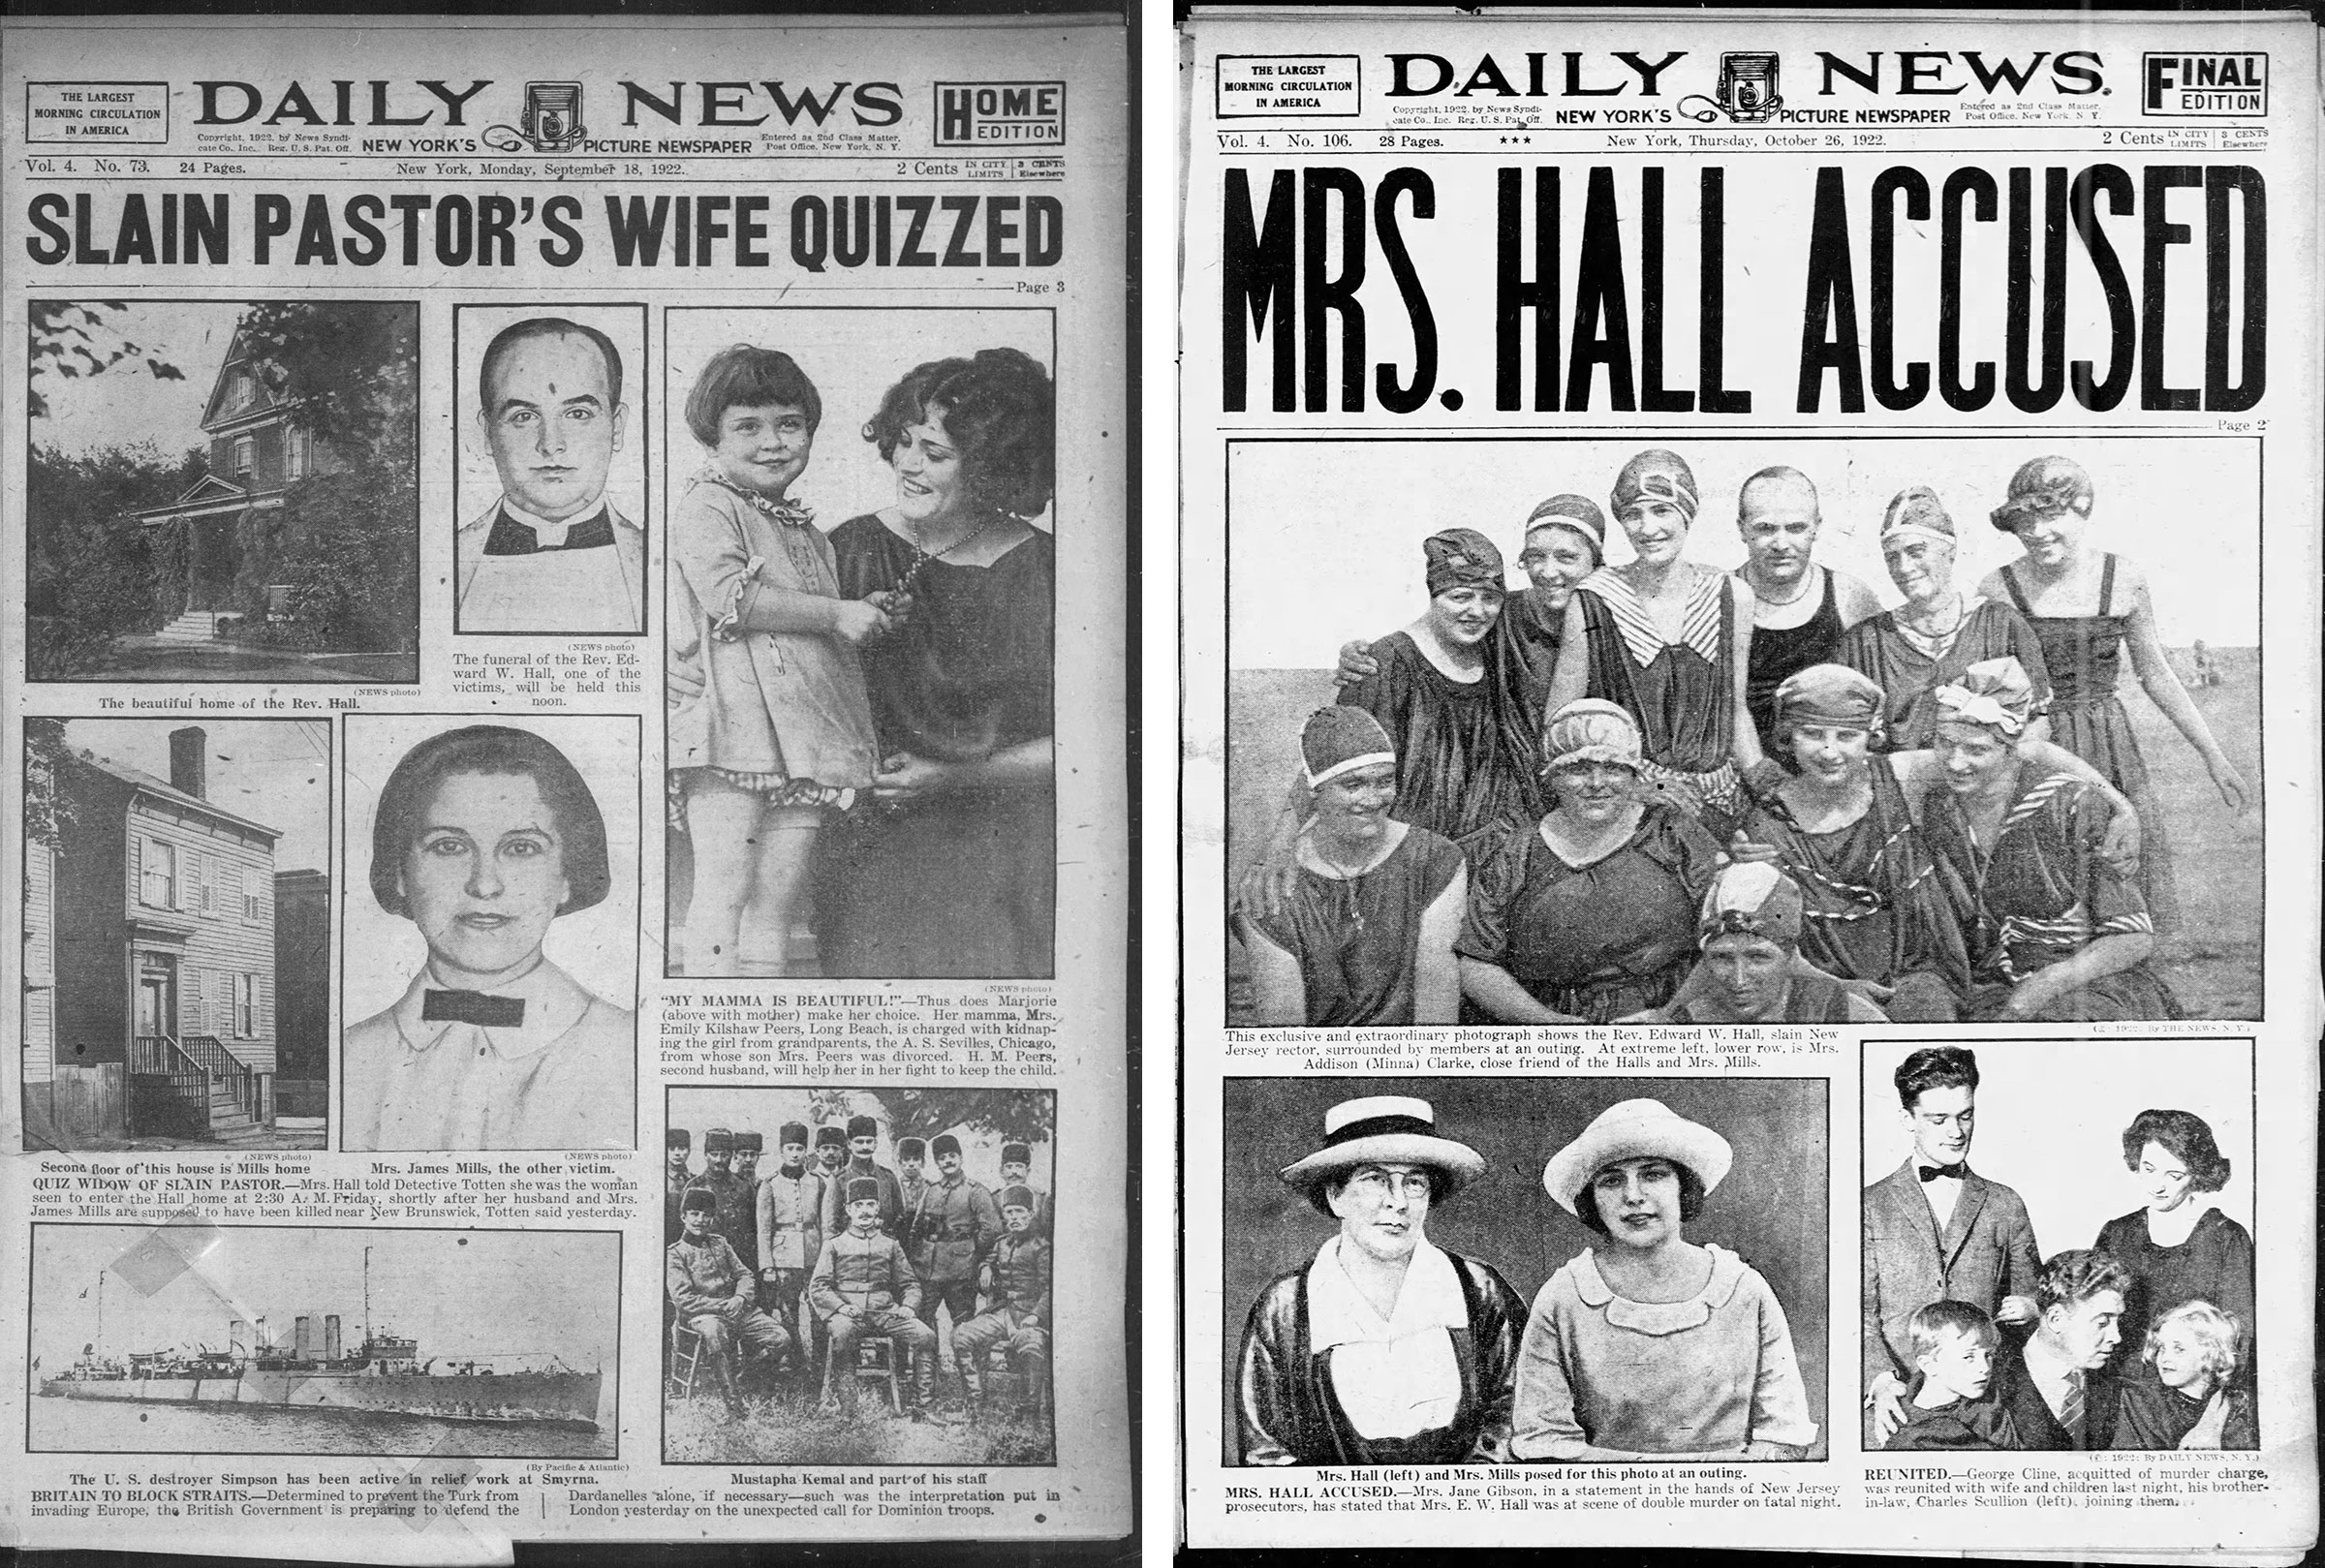 two covers from the Daily News